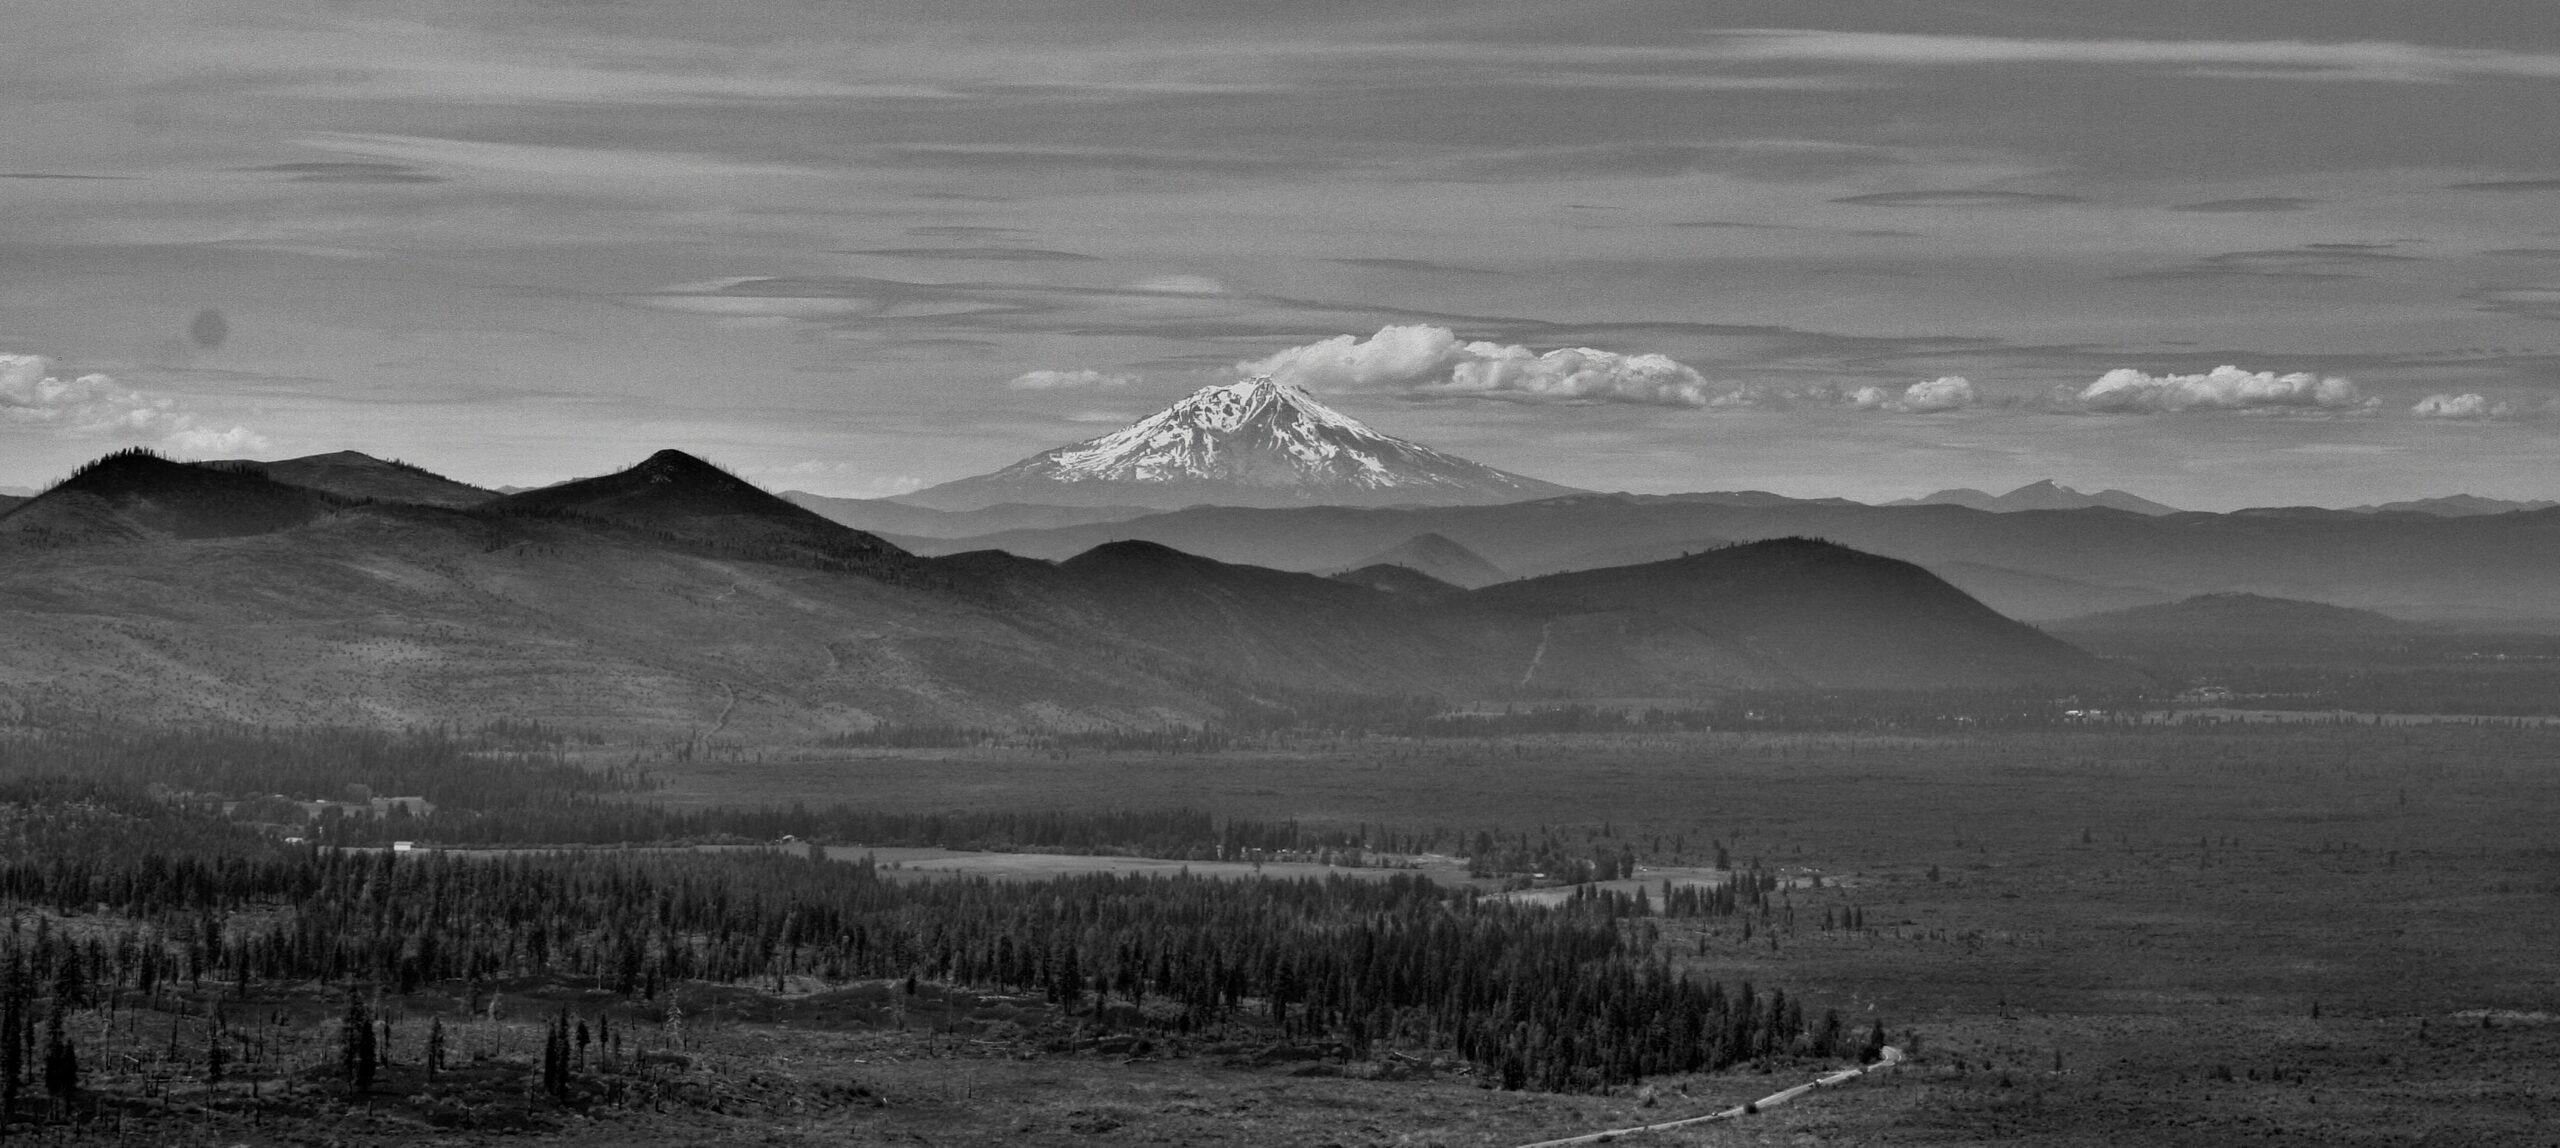 Where Are The Sacred Sites On Mt. Shasta?